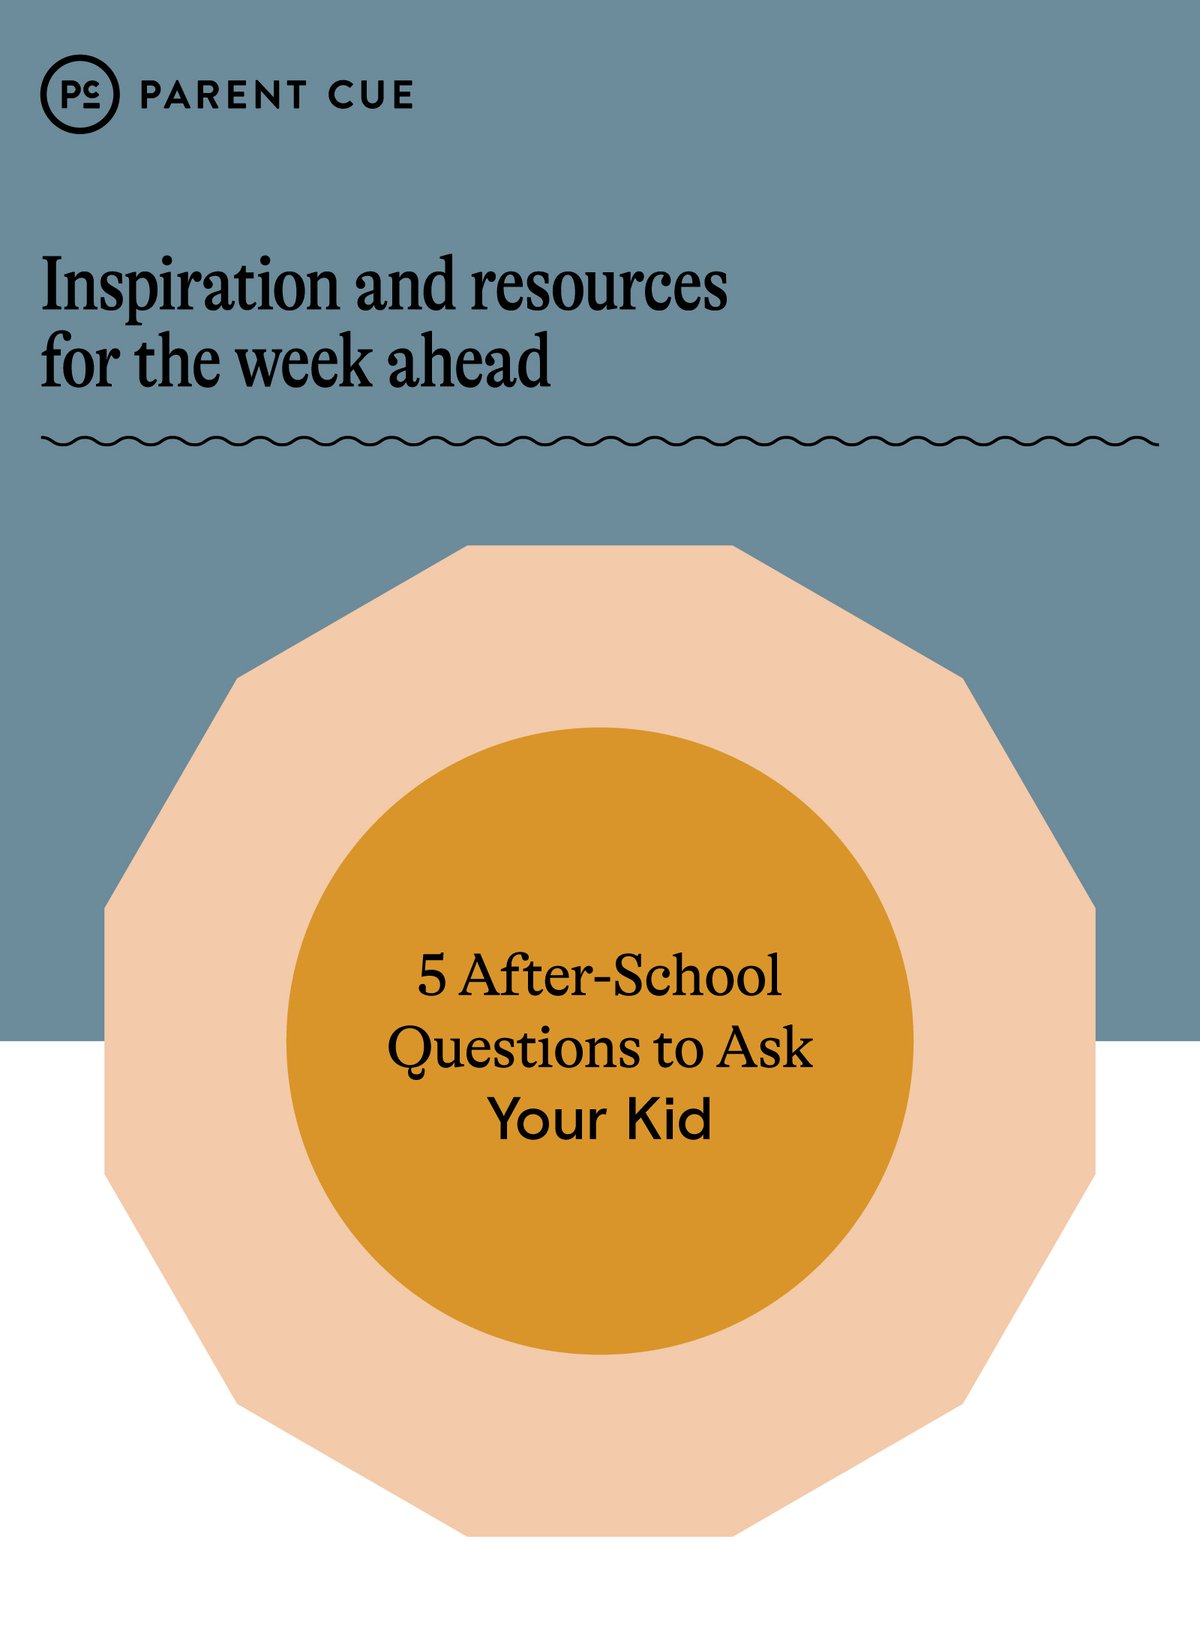 5 After-School Questions to Ask Your Kid